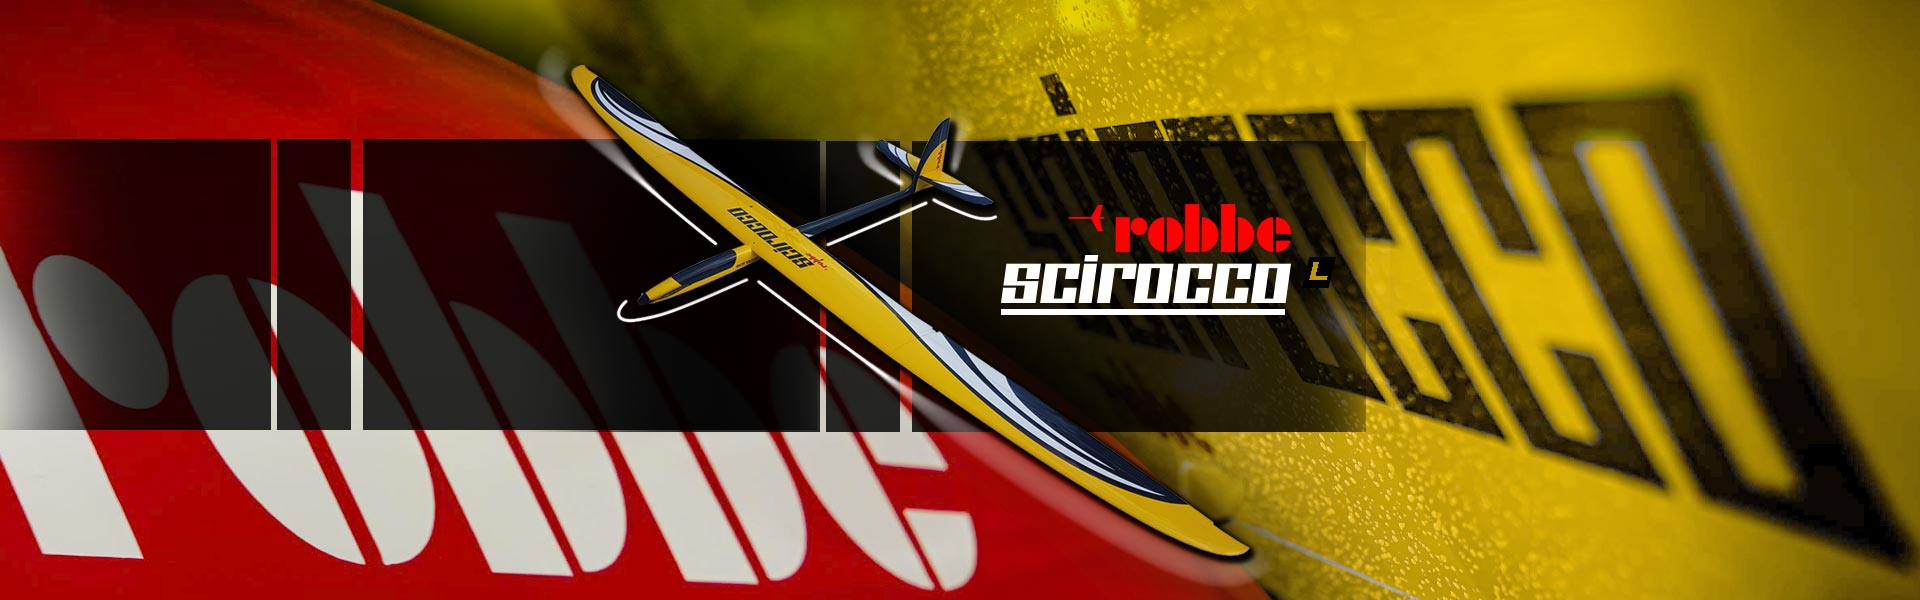 Scirocco_Robbe_Banner_1920x600Landing